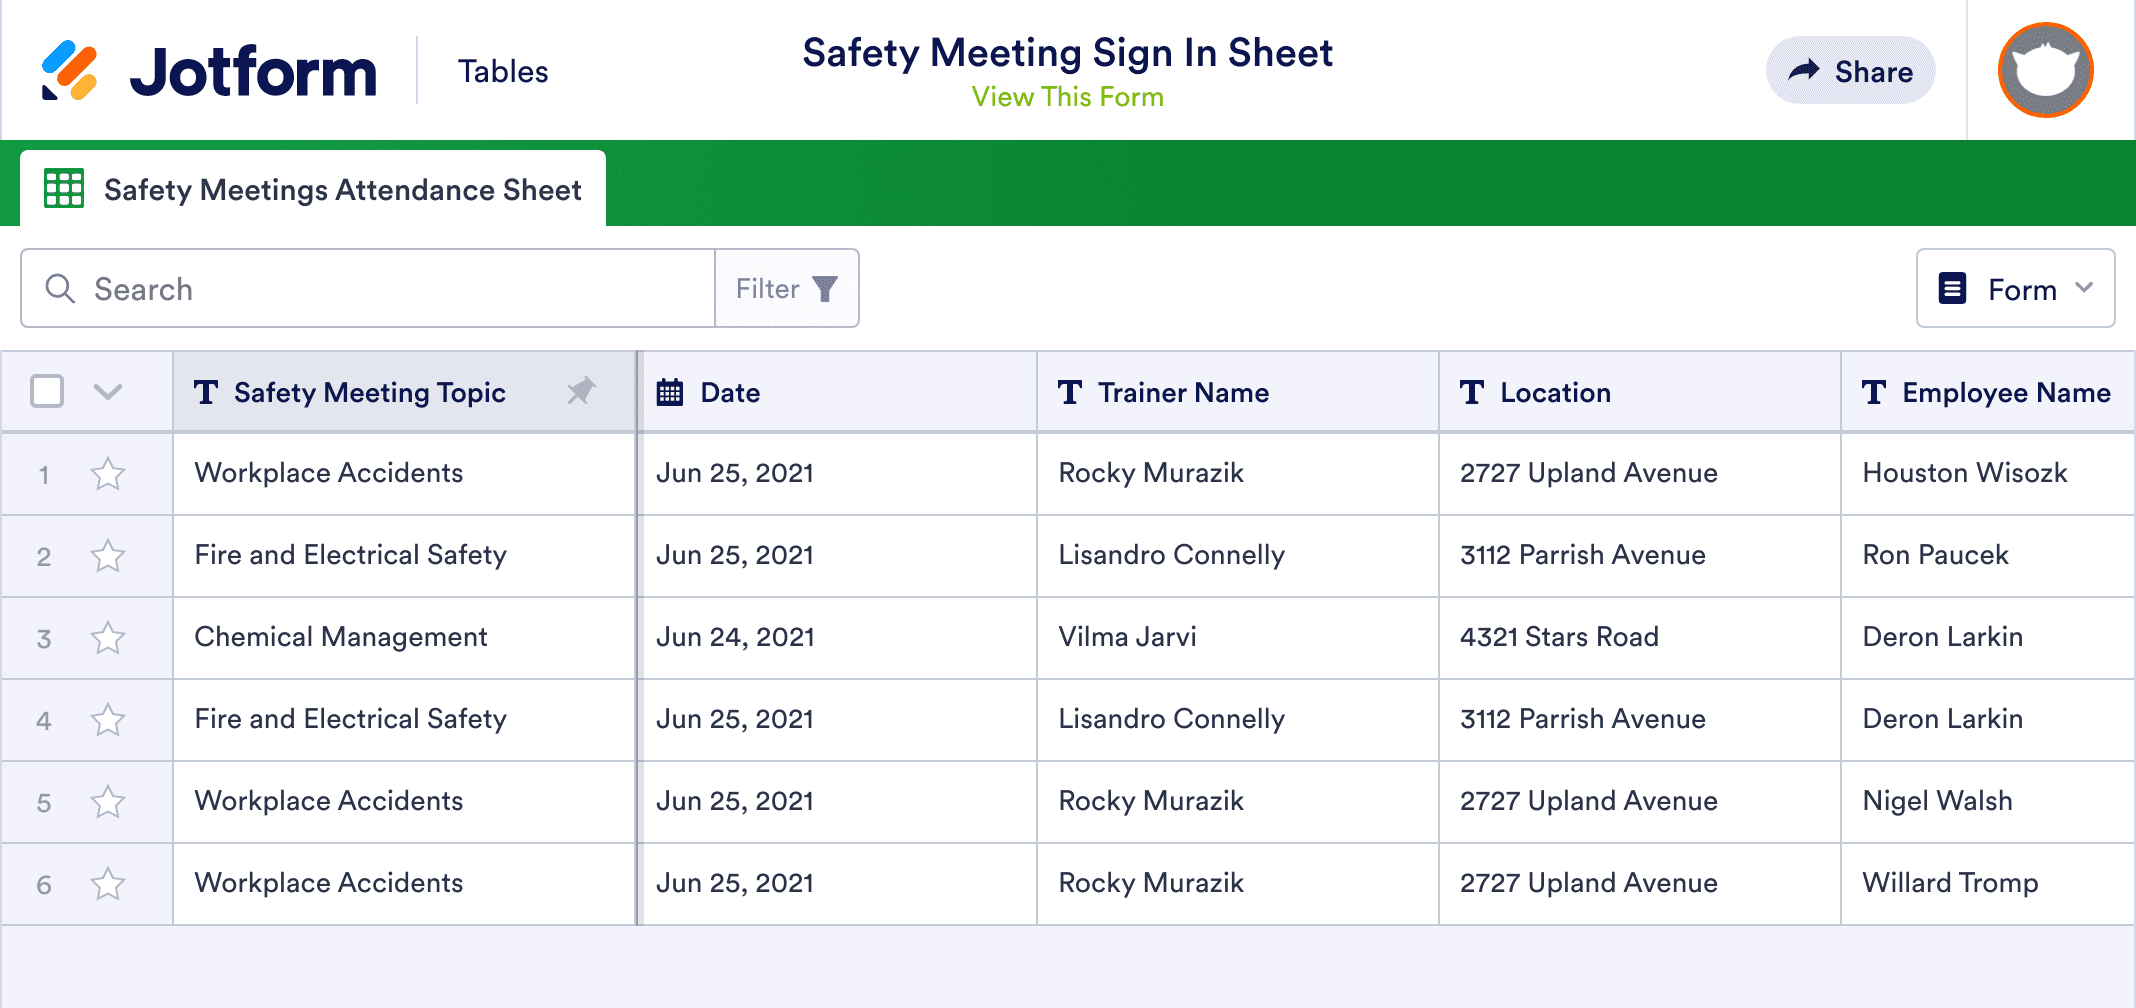 Safety Meeting Sign In Sheet